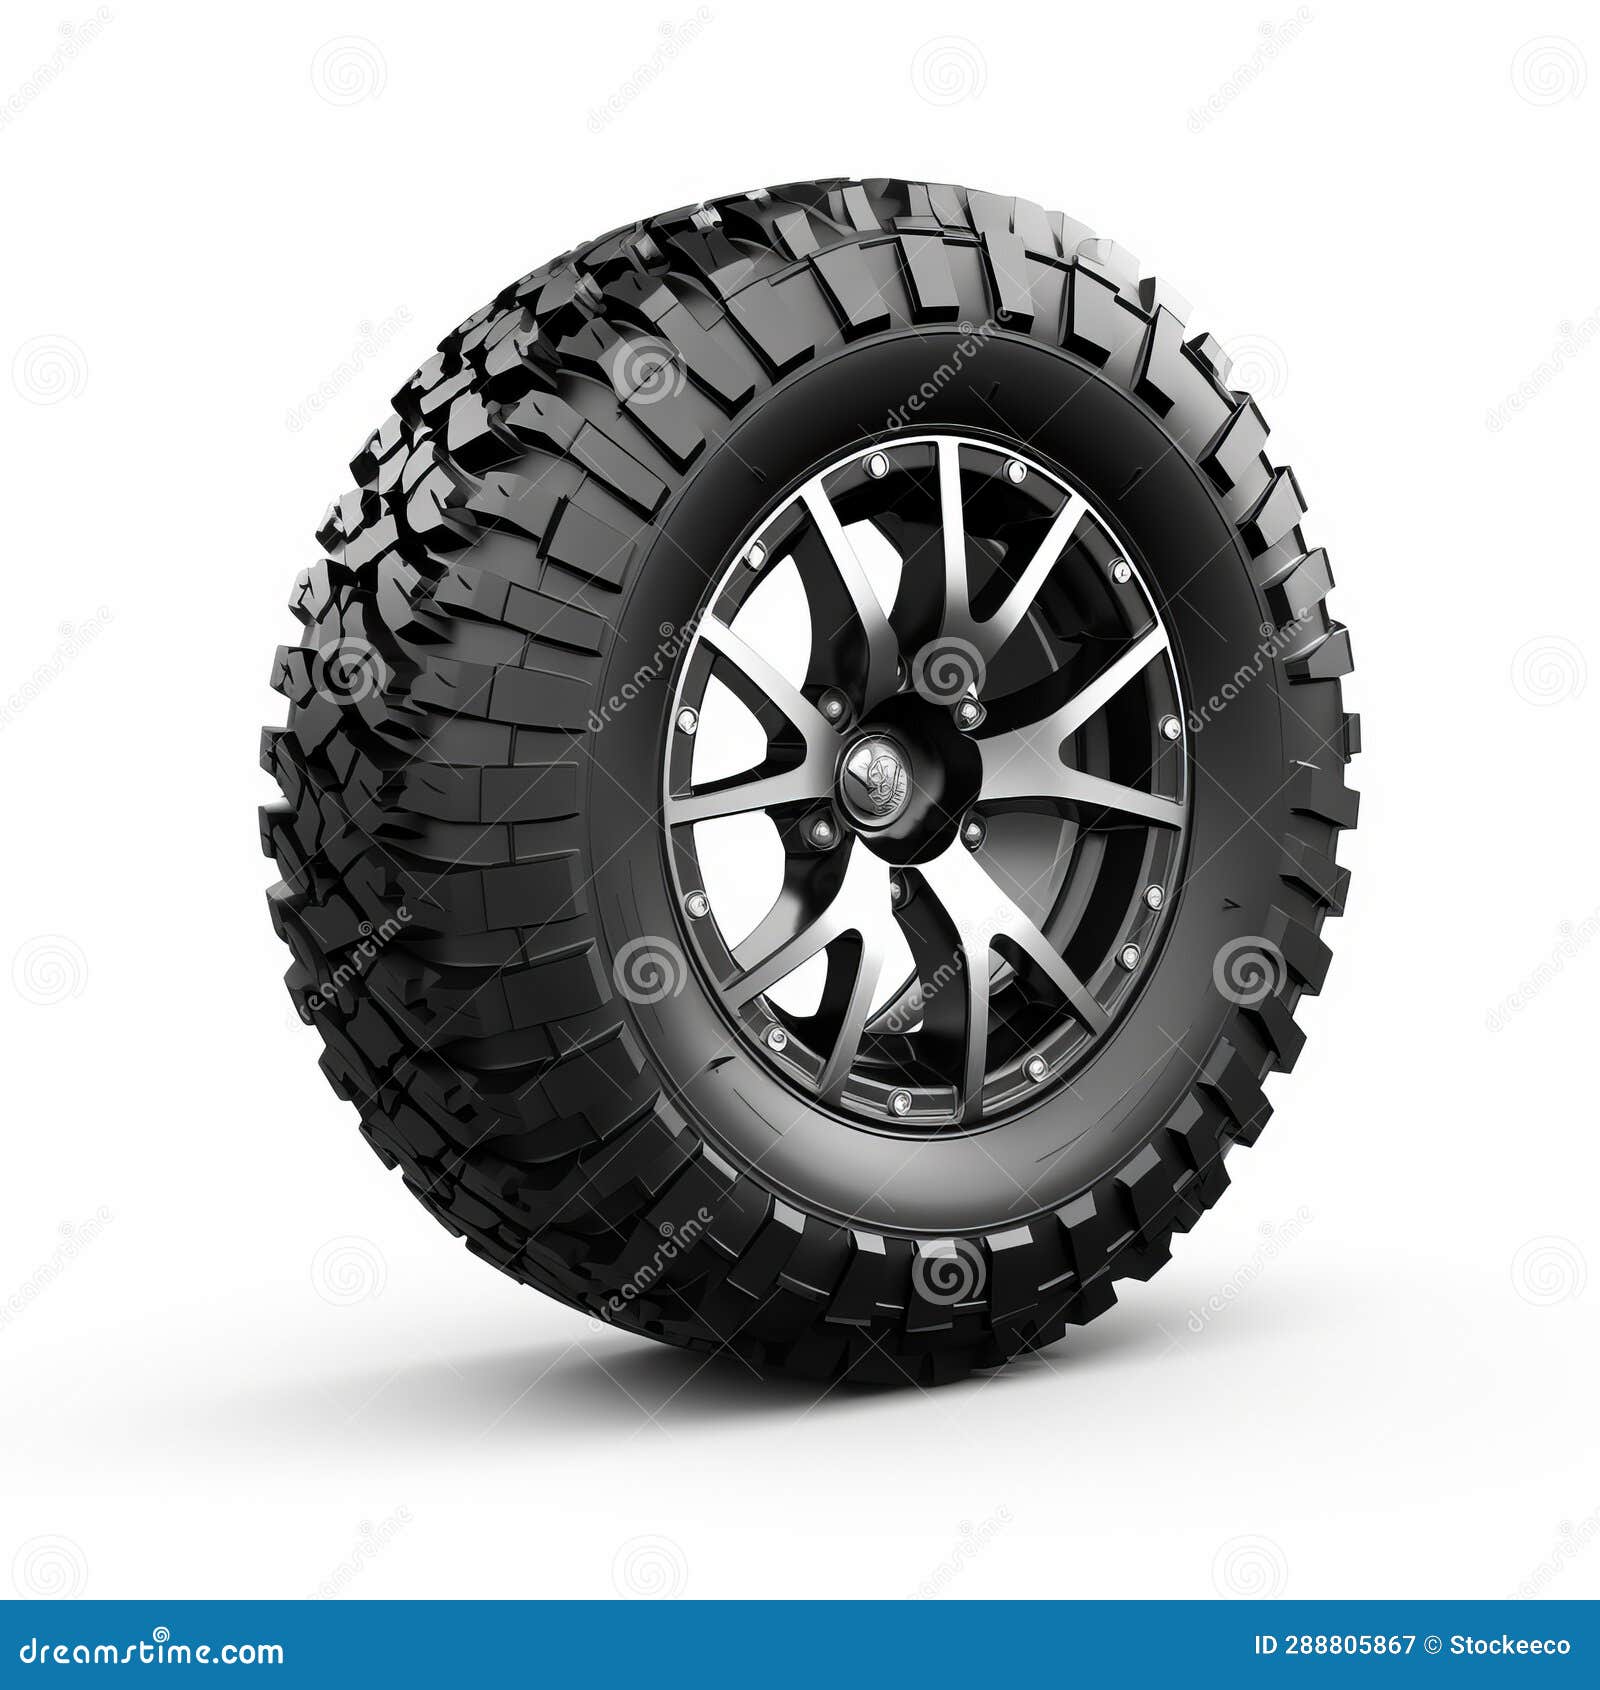 realistic off road tire  on white background